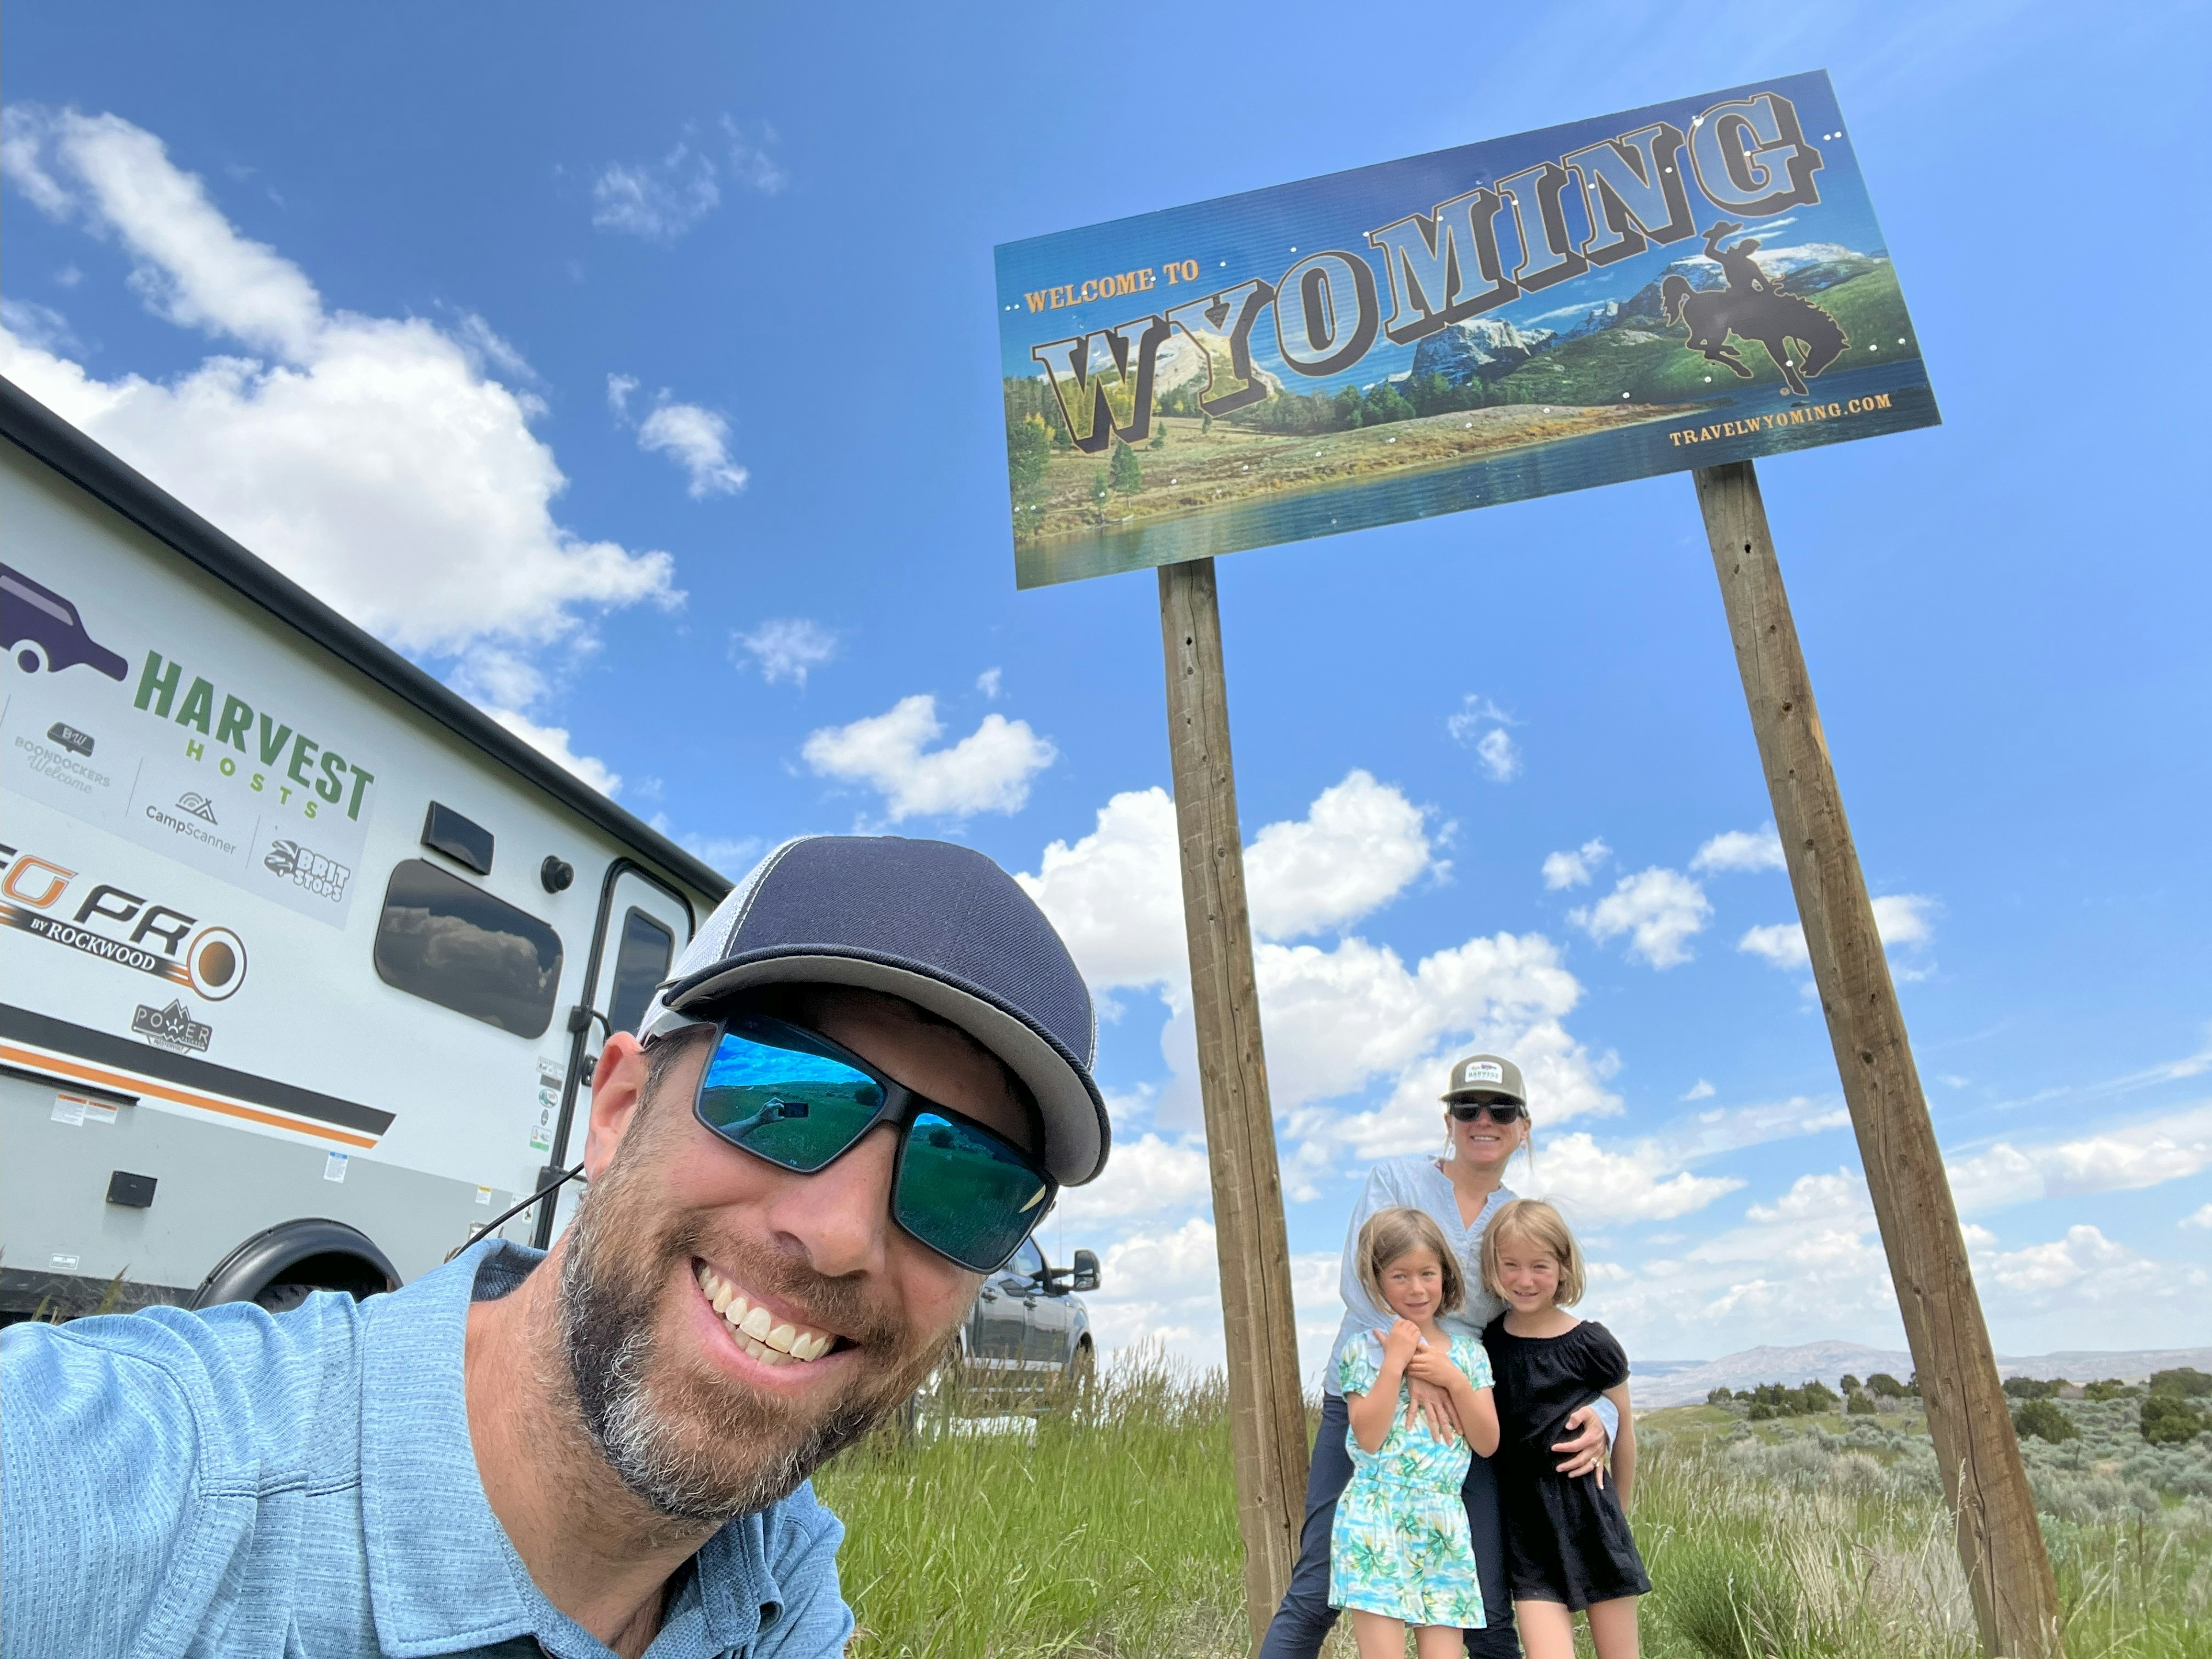 Our Summer Road Trip: 2 Months, 11 States, 3,500 Miles